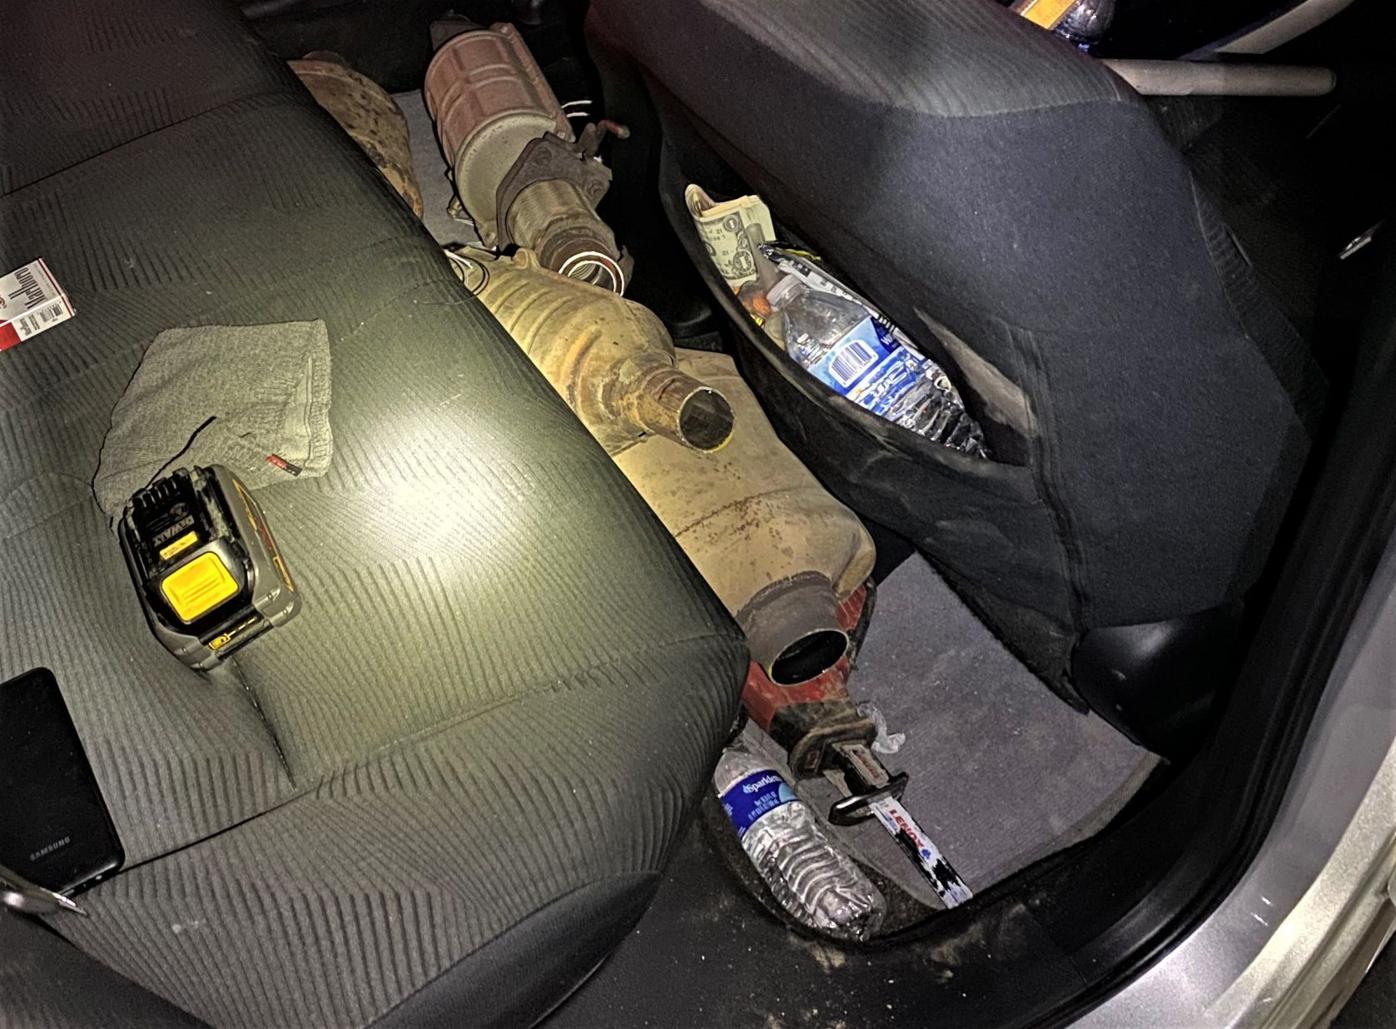 Catalytic converter theft-Back Seat